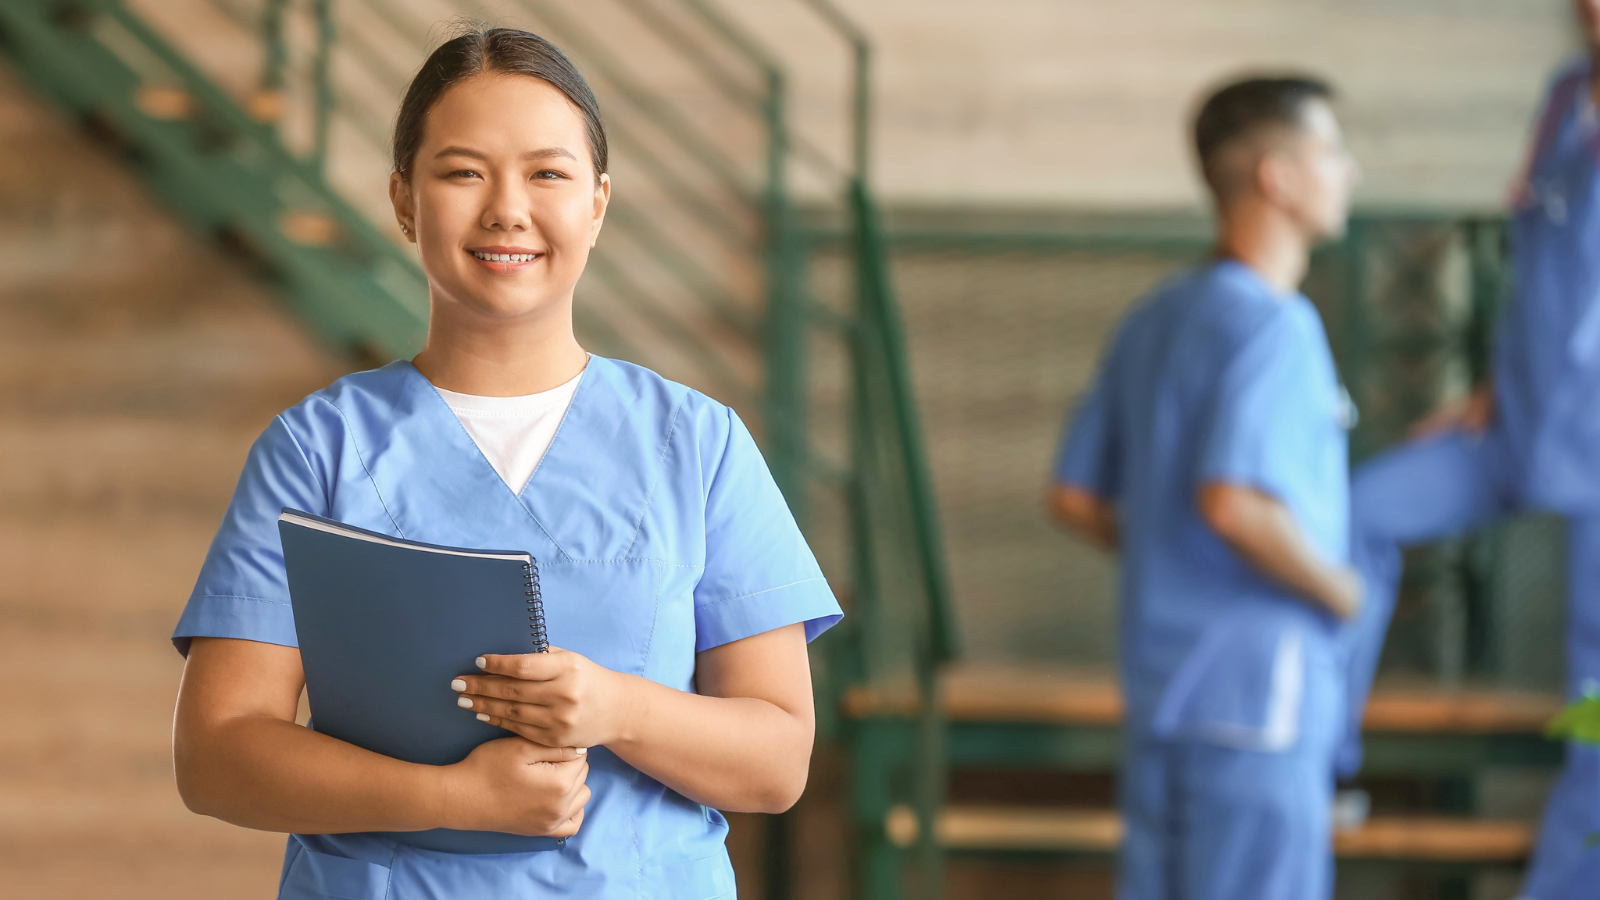 alt="4 Studying Hacks to pass the NCLEX Exam on Your First Try">